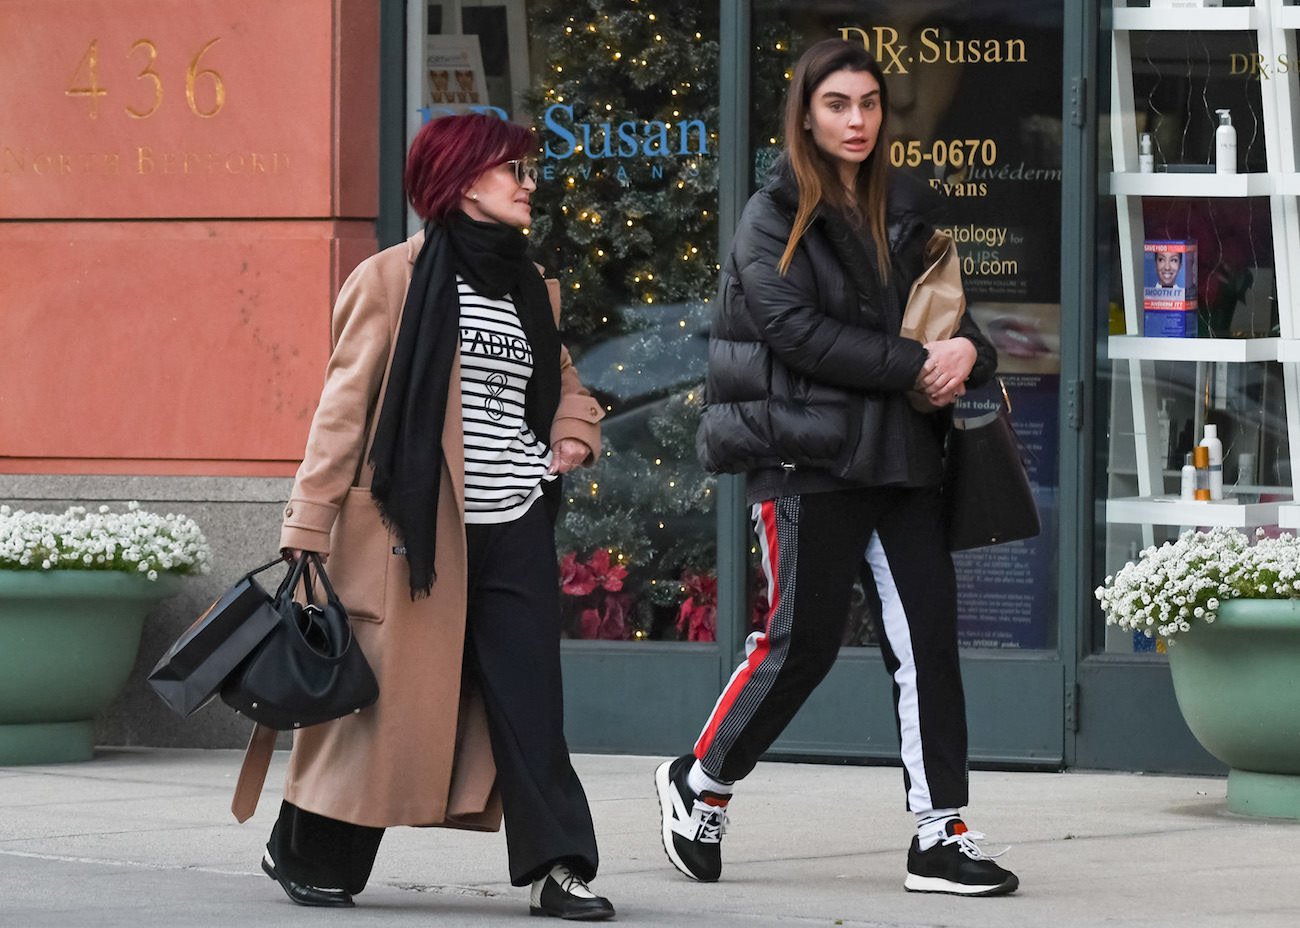 Sharon Osbourne with her daughter Aimee Osbourne out shopping in Los Angeles in 2020.